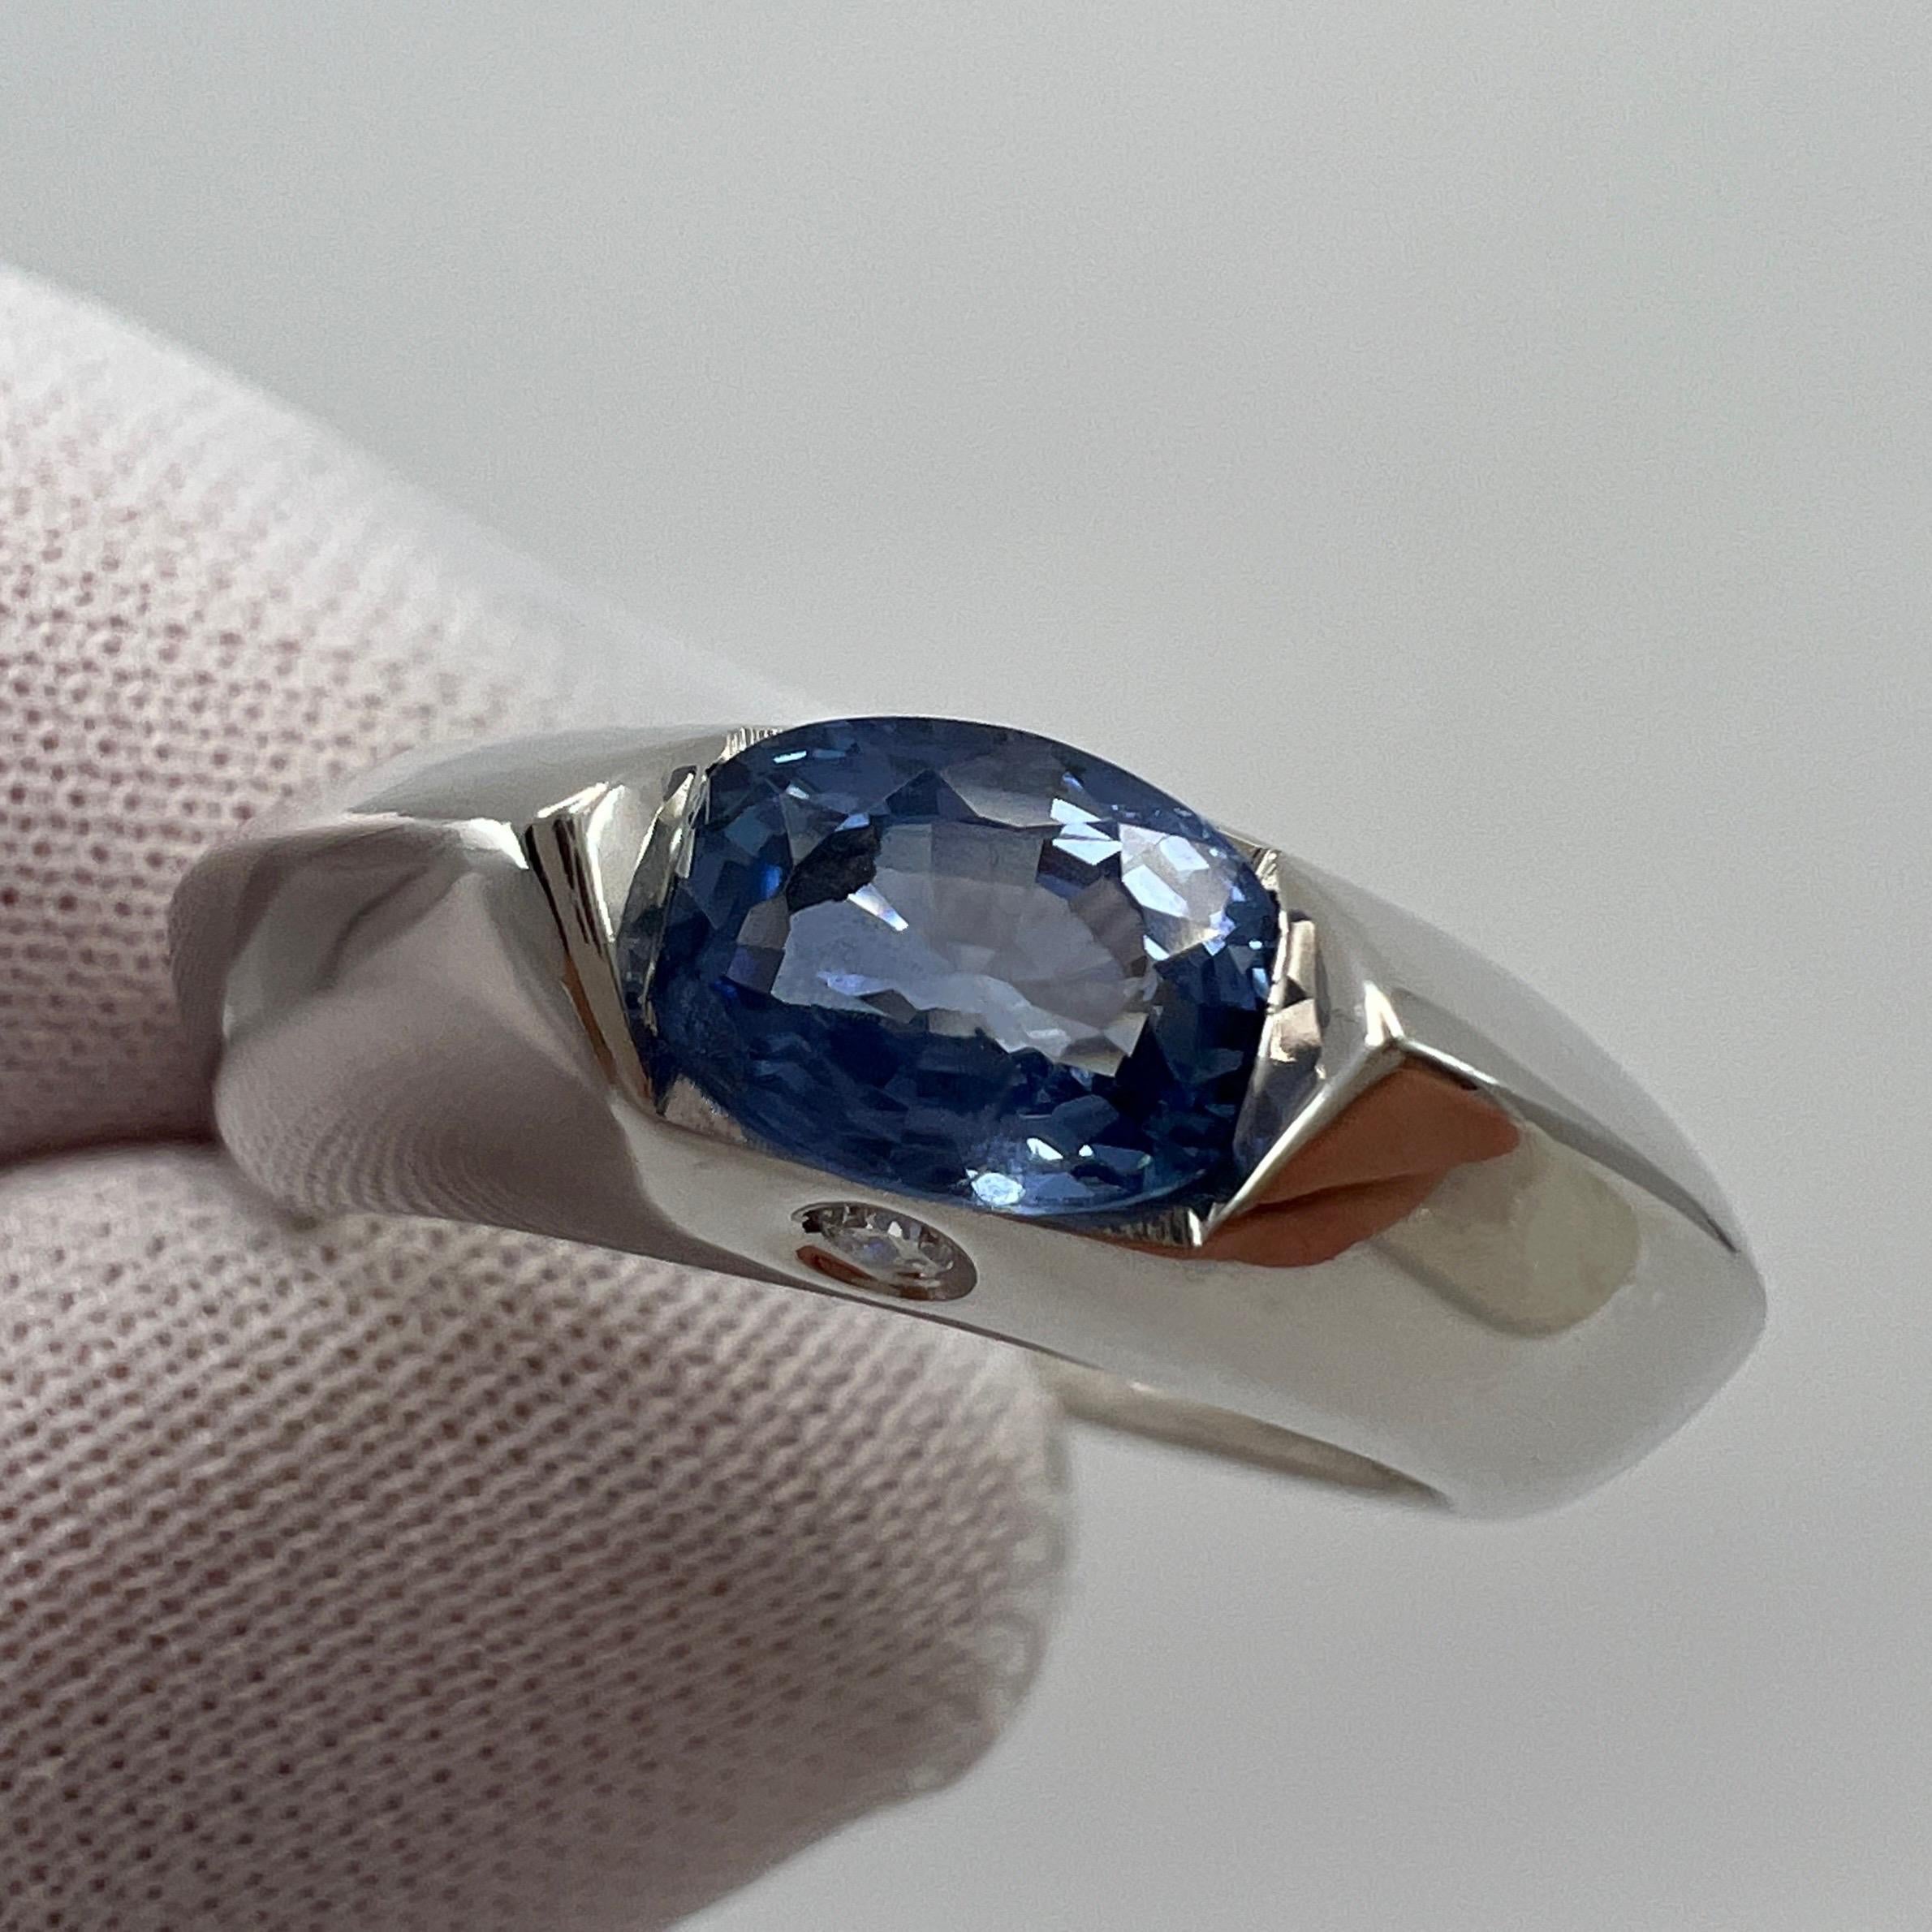 Vintage Piaget Blue Sapphire & Diamond 18k White Gold Ring.

Stunning white gold PIAGET ring set with a beautiful oval cut sapphire with a fine vivid blue colour, very good cut and good clarity. Some small inclusions in the stone but still a fine